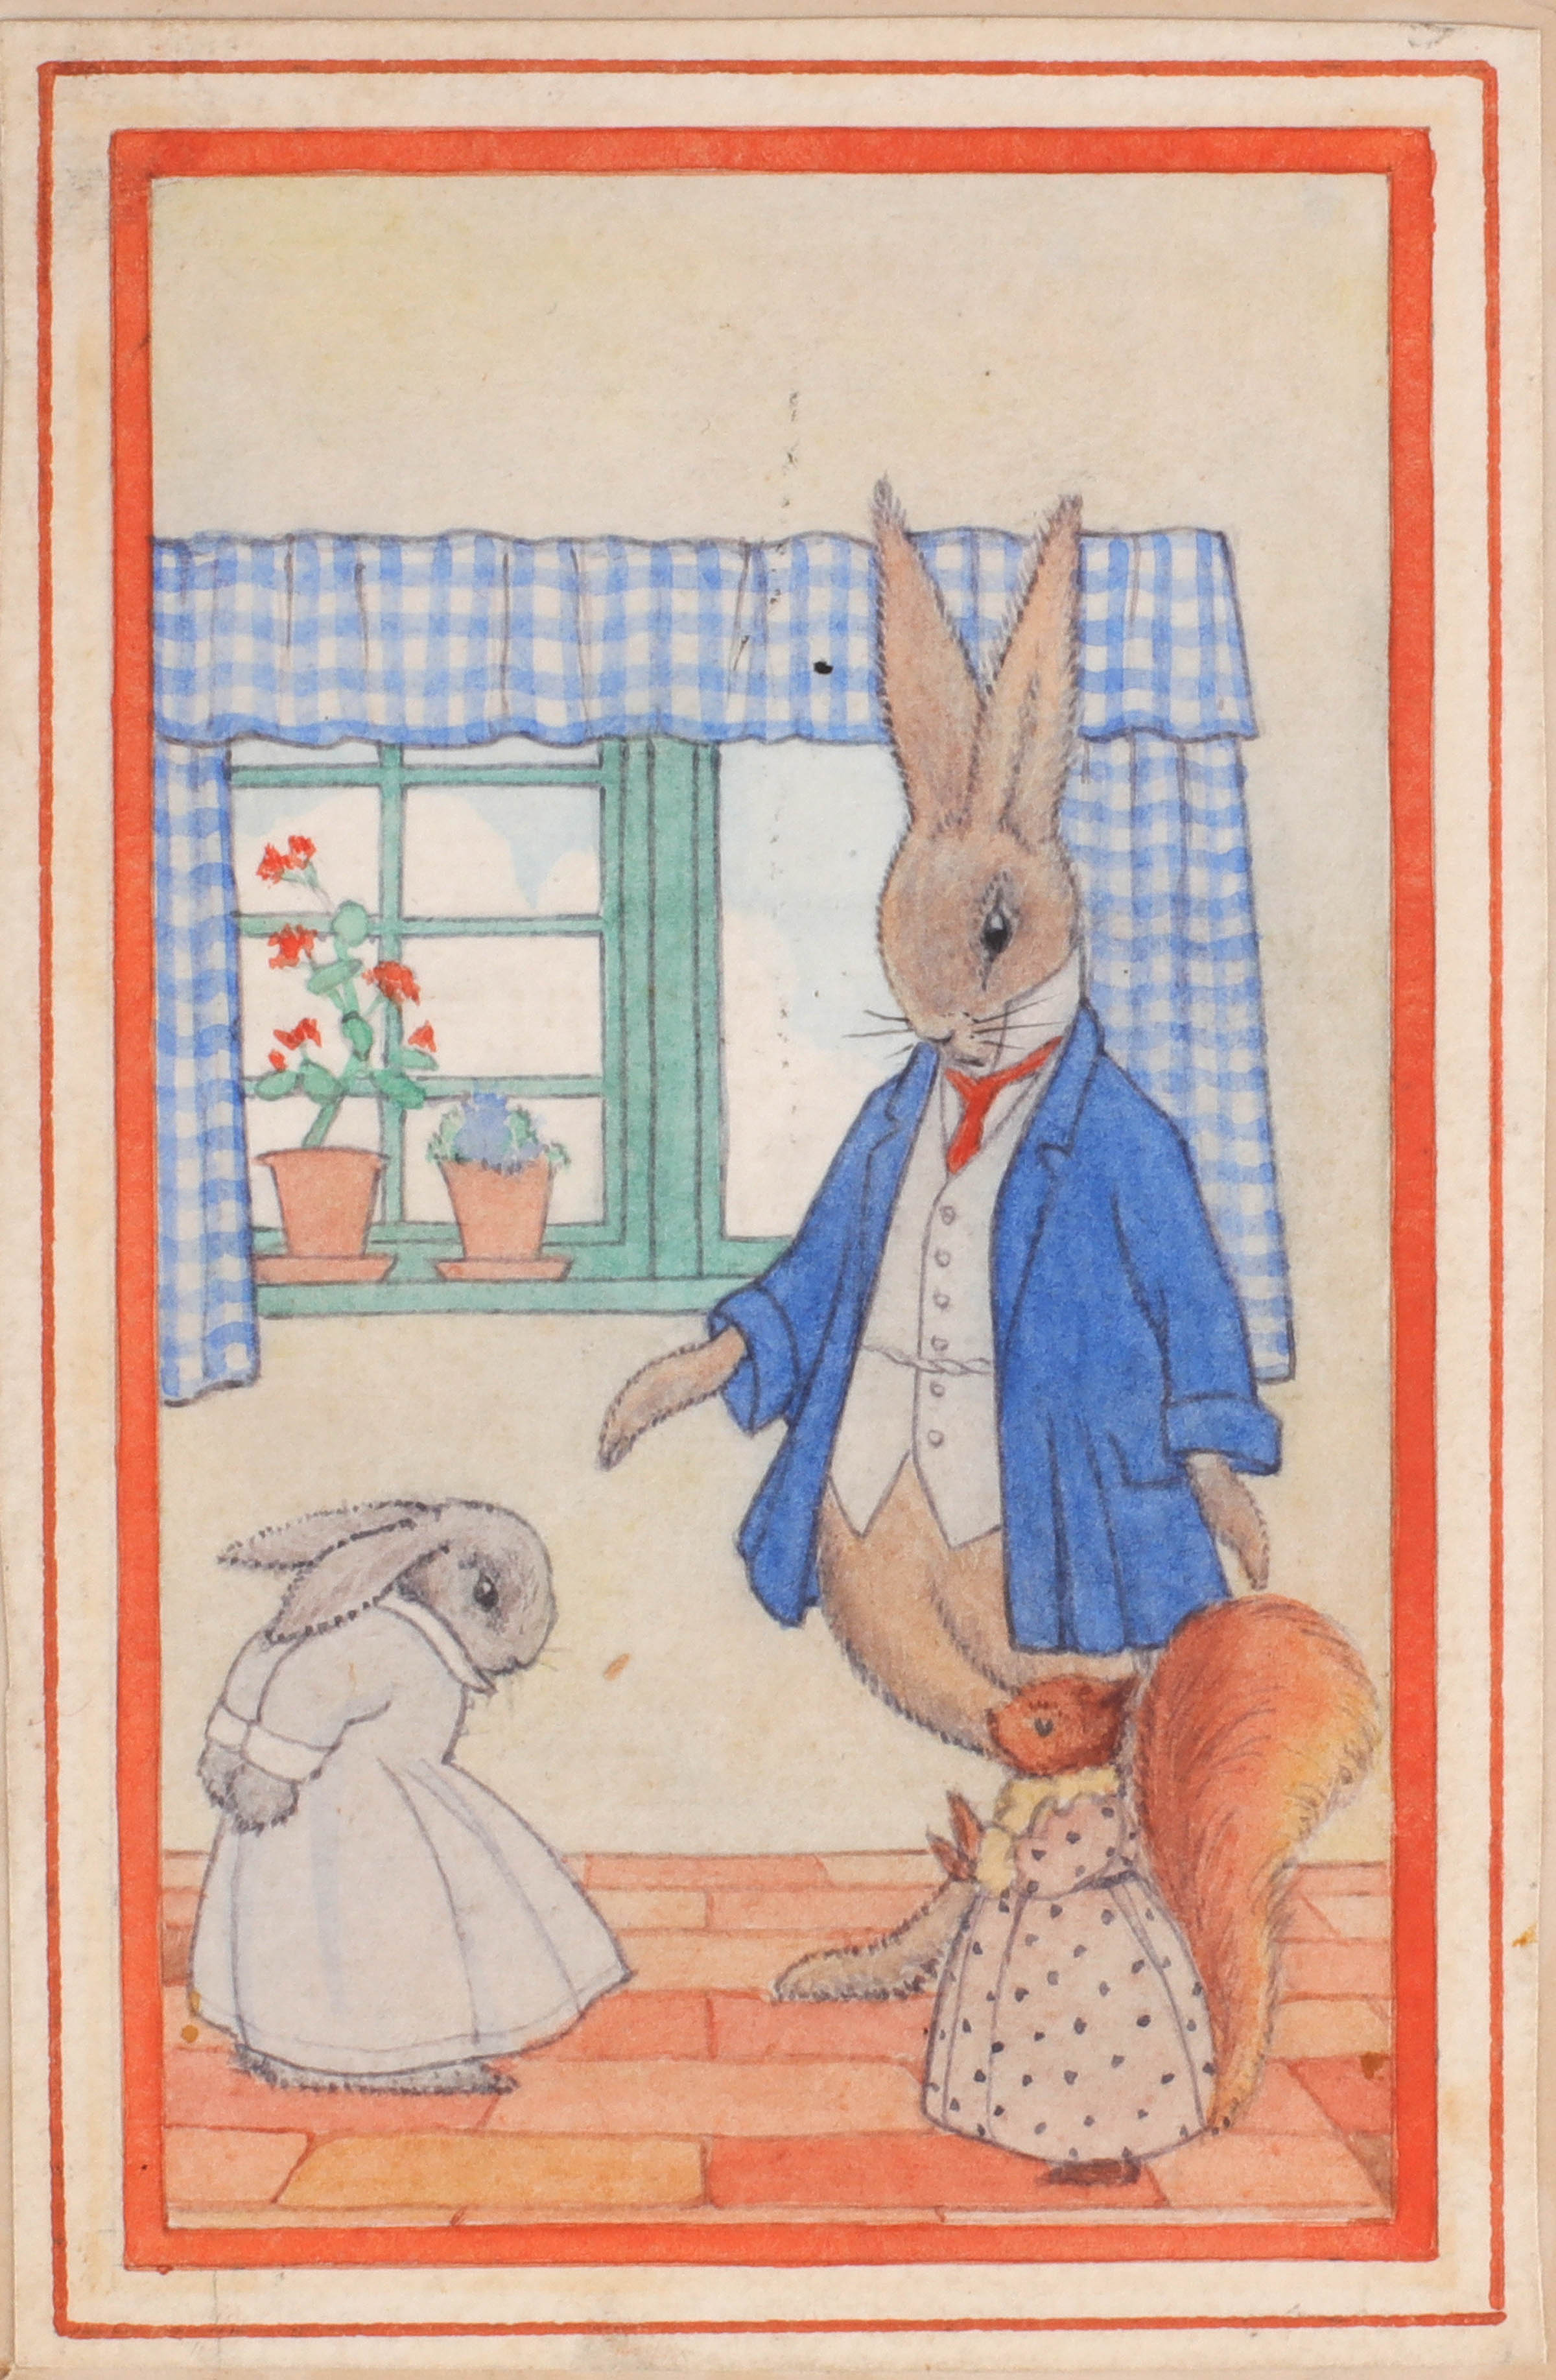 Disgraceful Said the Hare. - , 